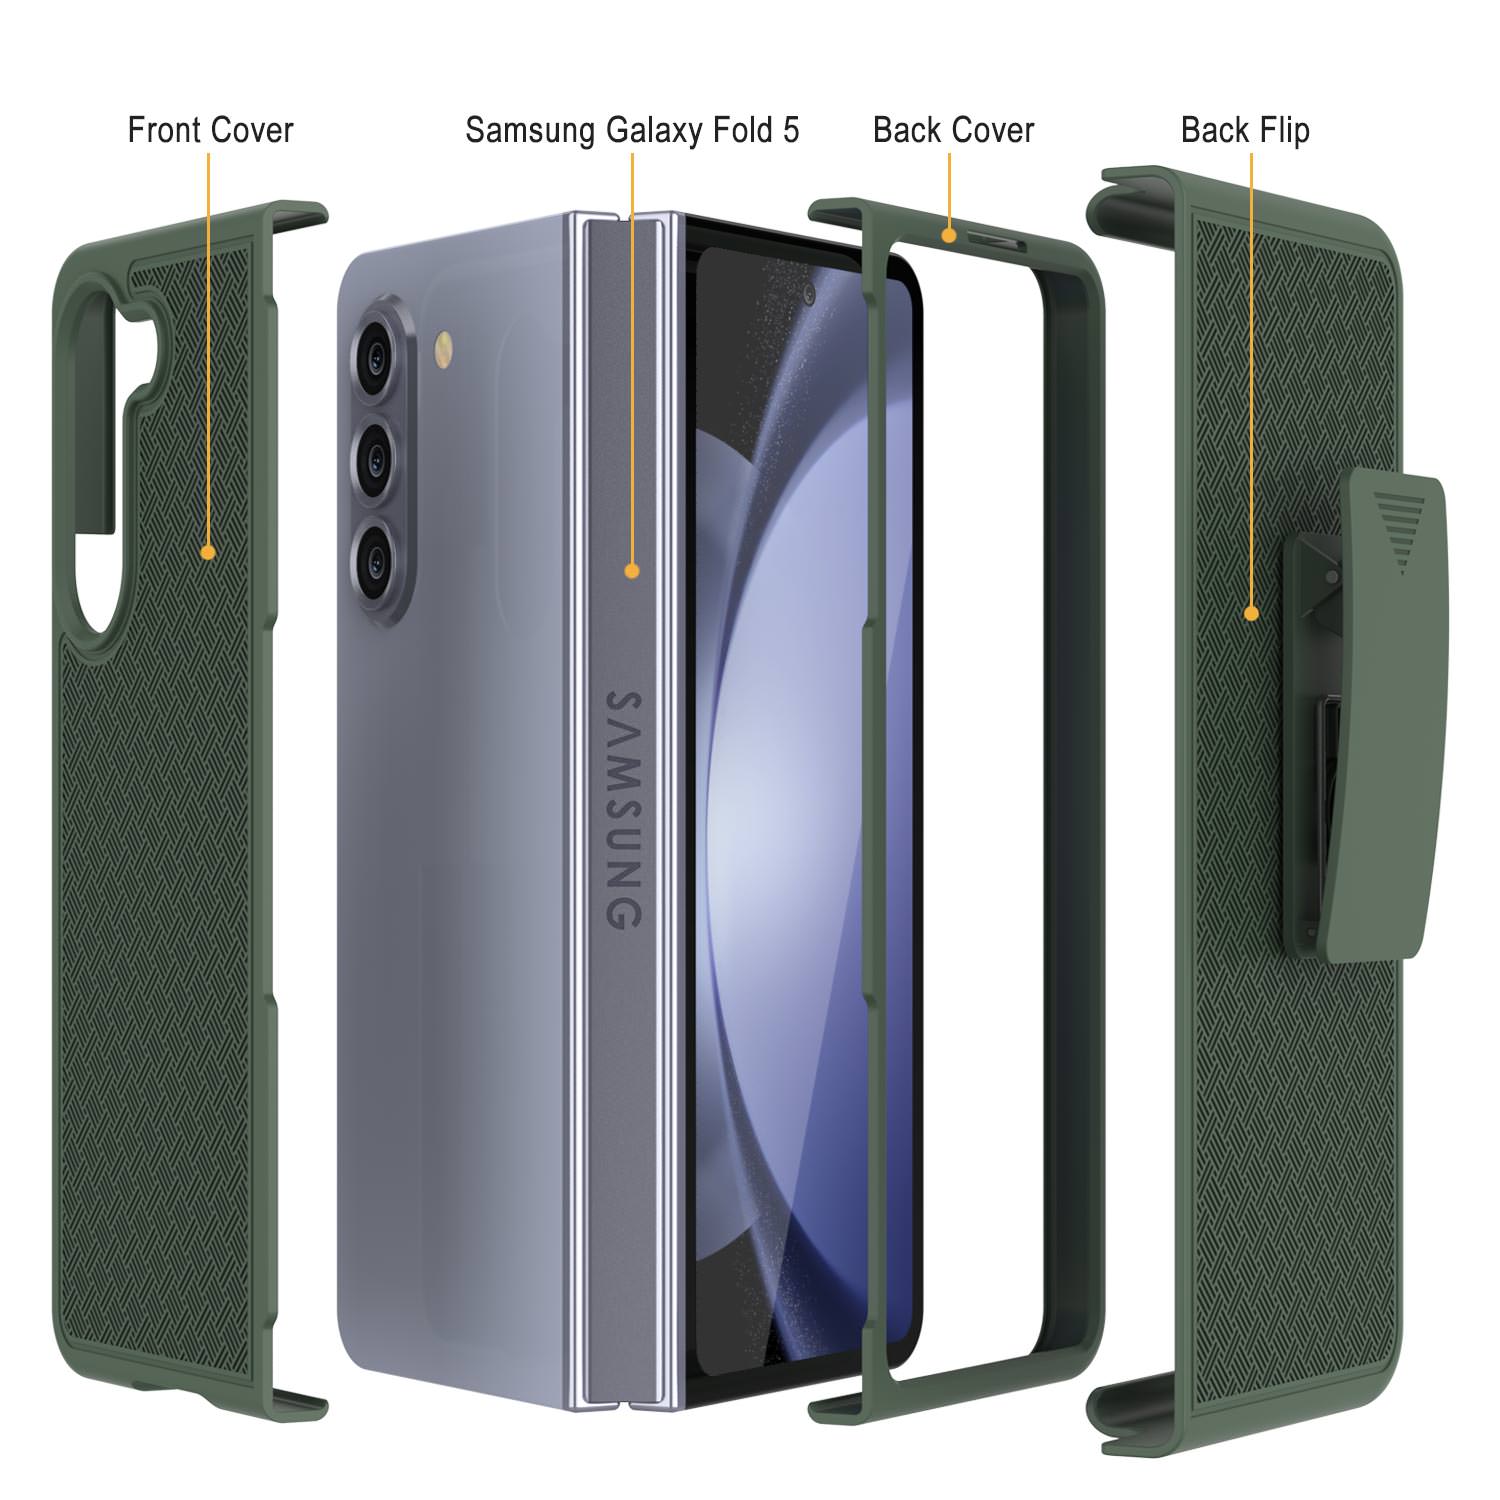 Galaxy Z Fold5 Case With Tempered Glass Screen Protector, Holster Belt Clip & Built-In Kickstand [Green]